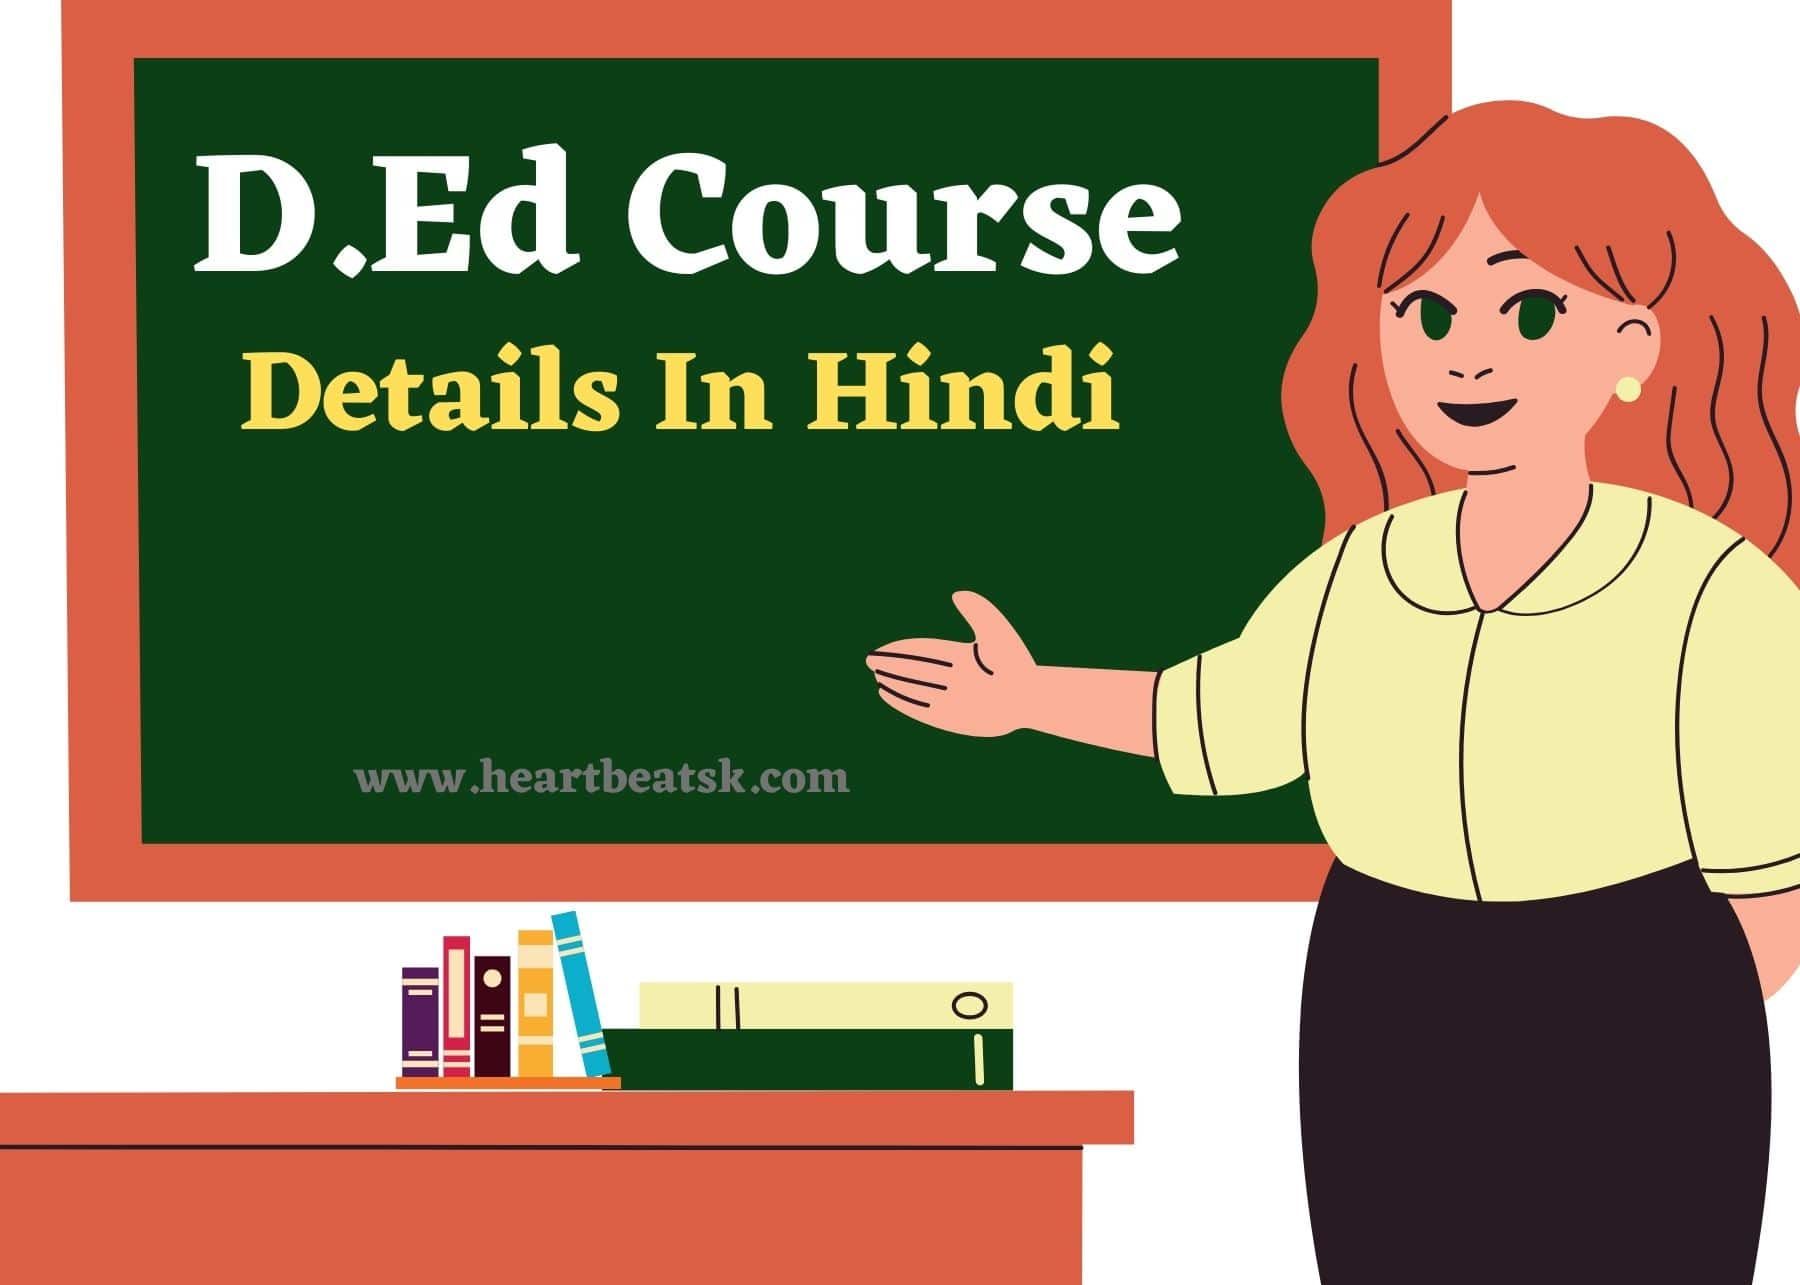 D.Ed Course Details In Hindi